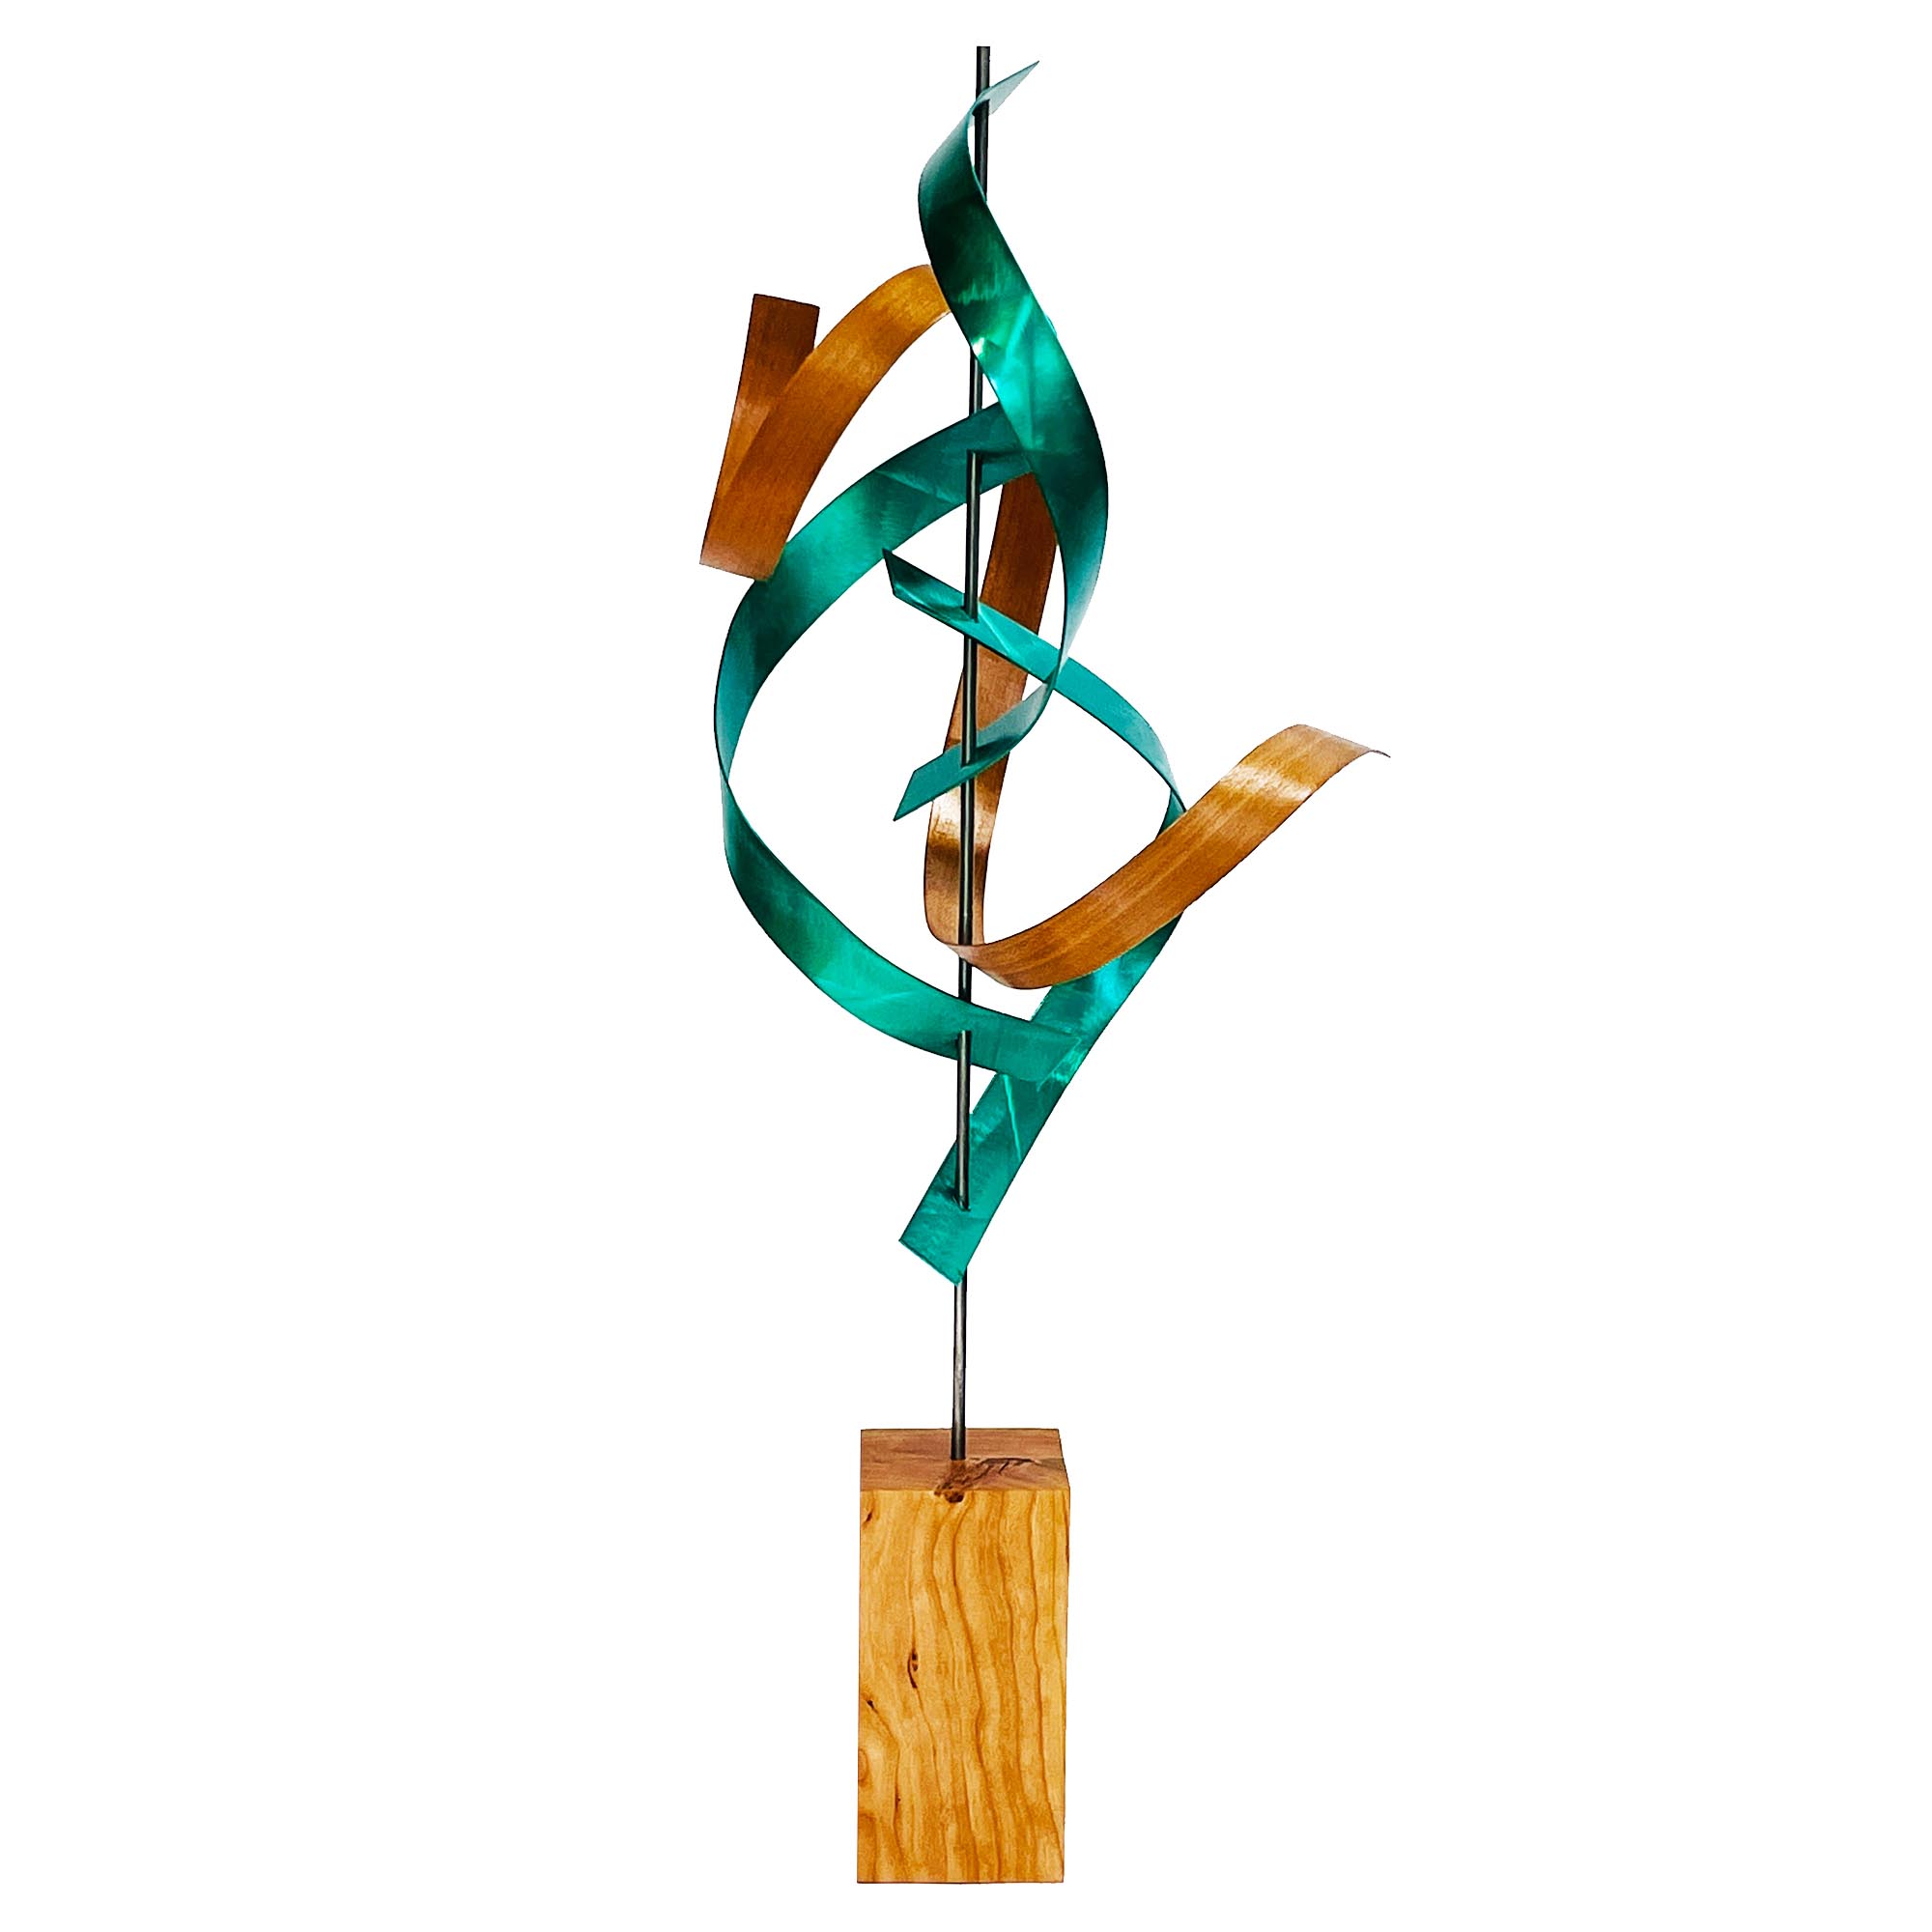 Jackson Wright 'Hopper Cherry' 10in x 29in Contemporary Style Abstract Wood Sculpture